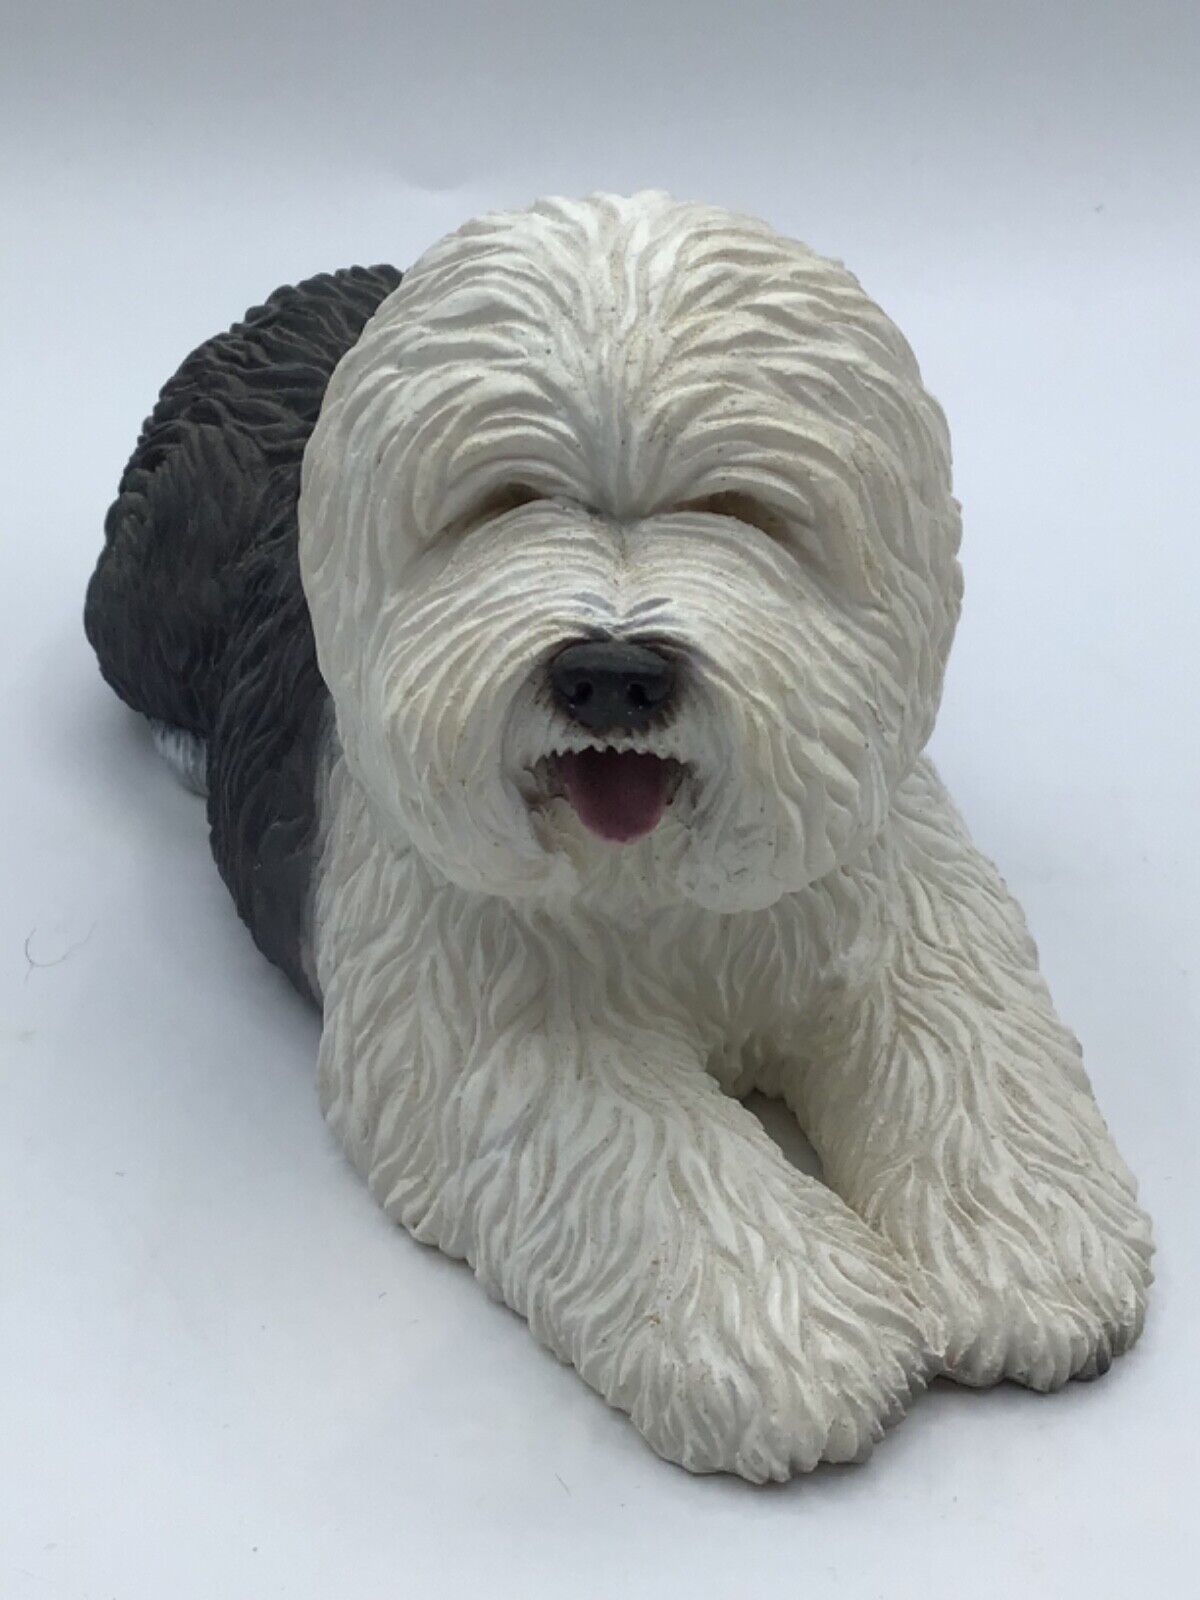 K-9 Kreations Dog Sculptue/ Figurine Sheep Dog White and Gray 3.5\